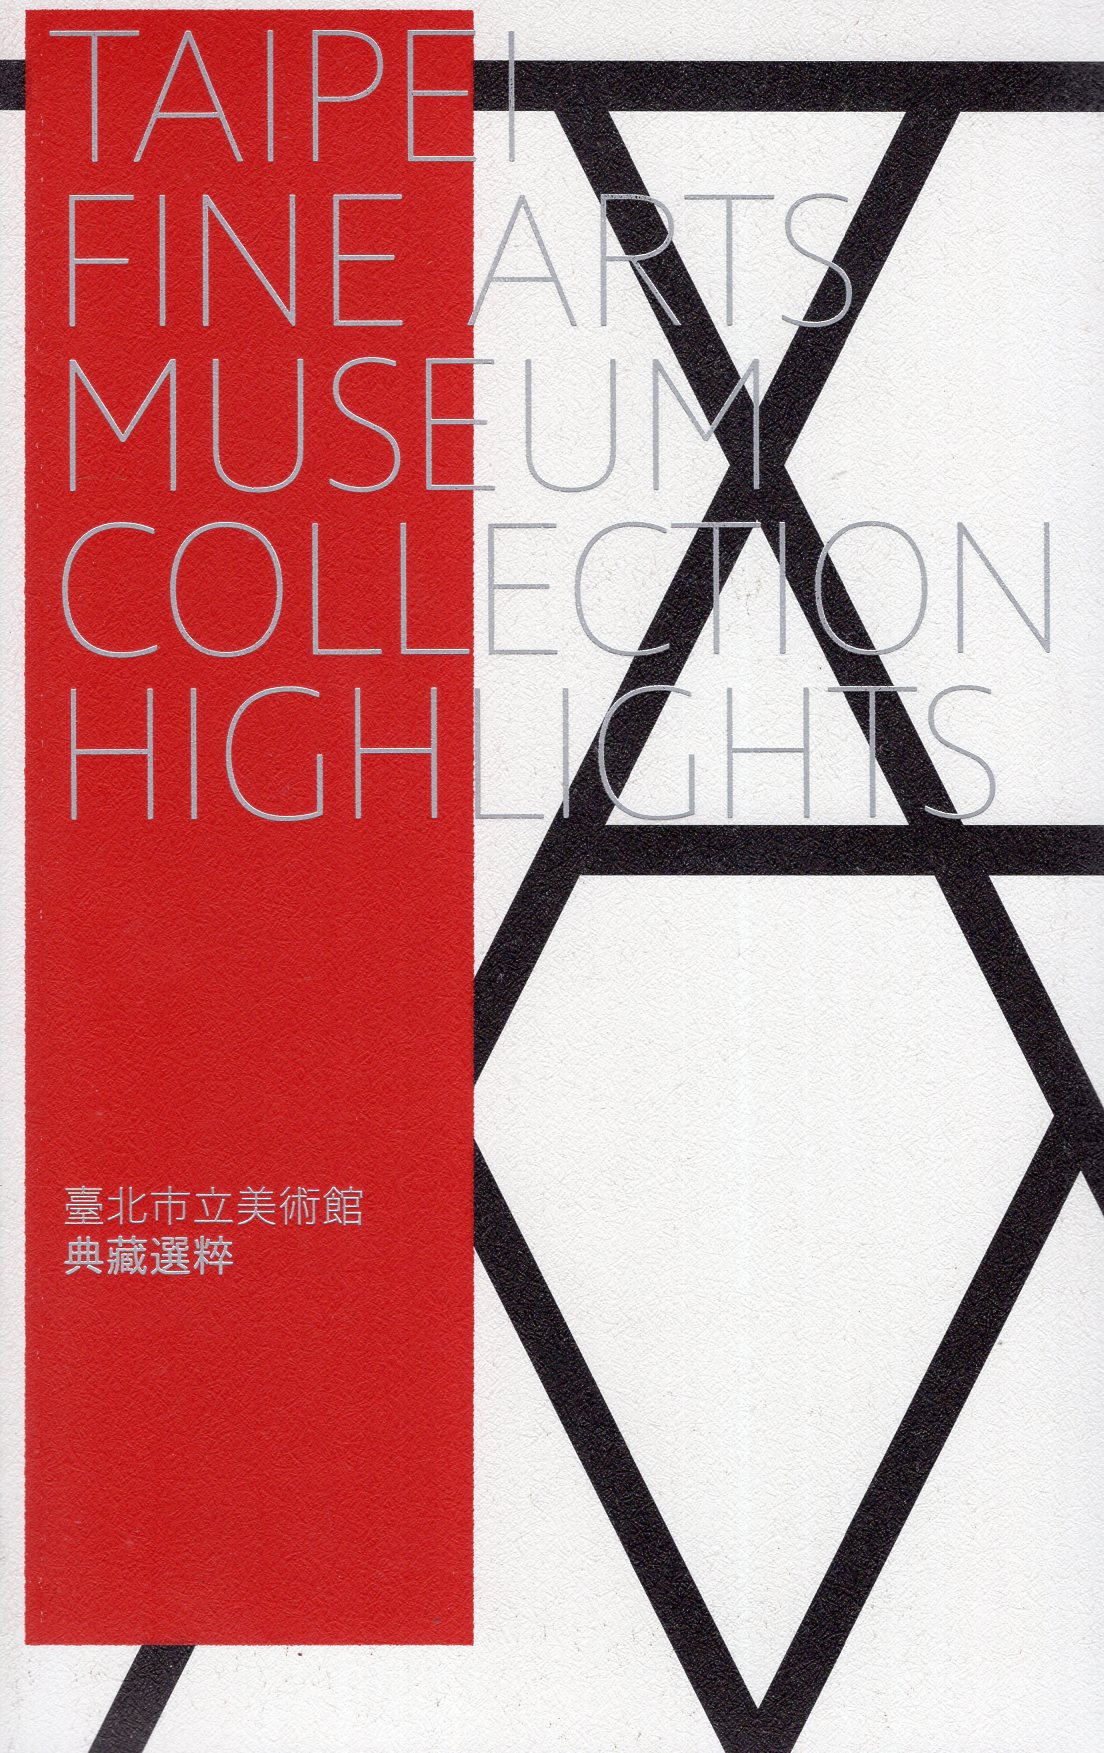 Taipei Fine Arts Museum Collection Highlights